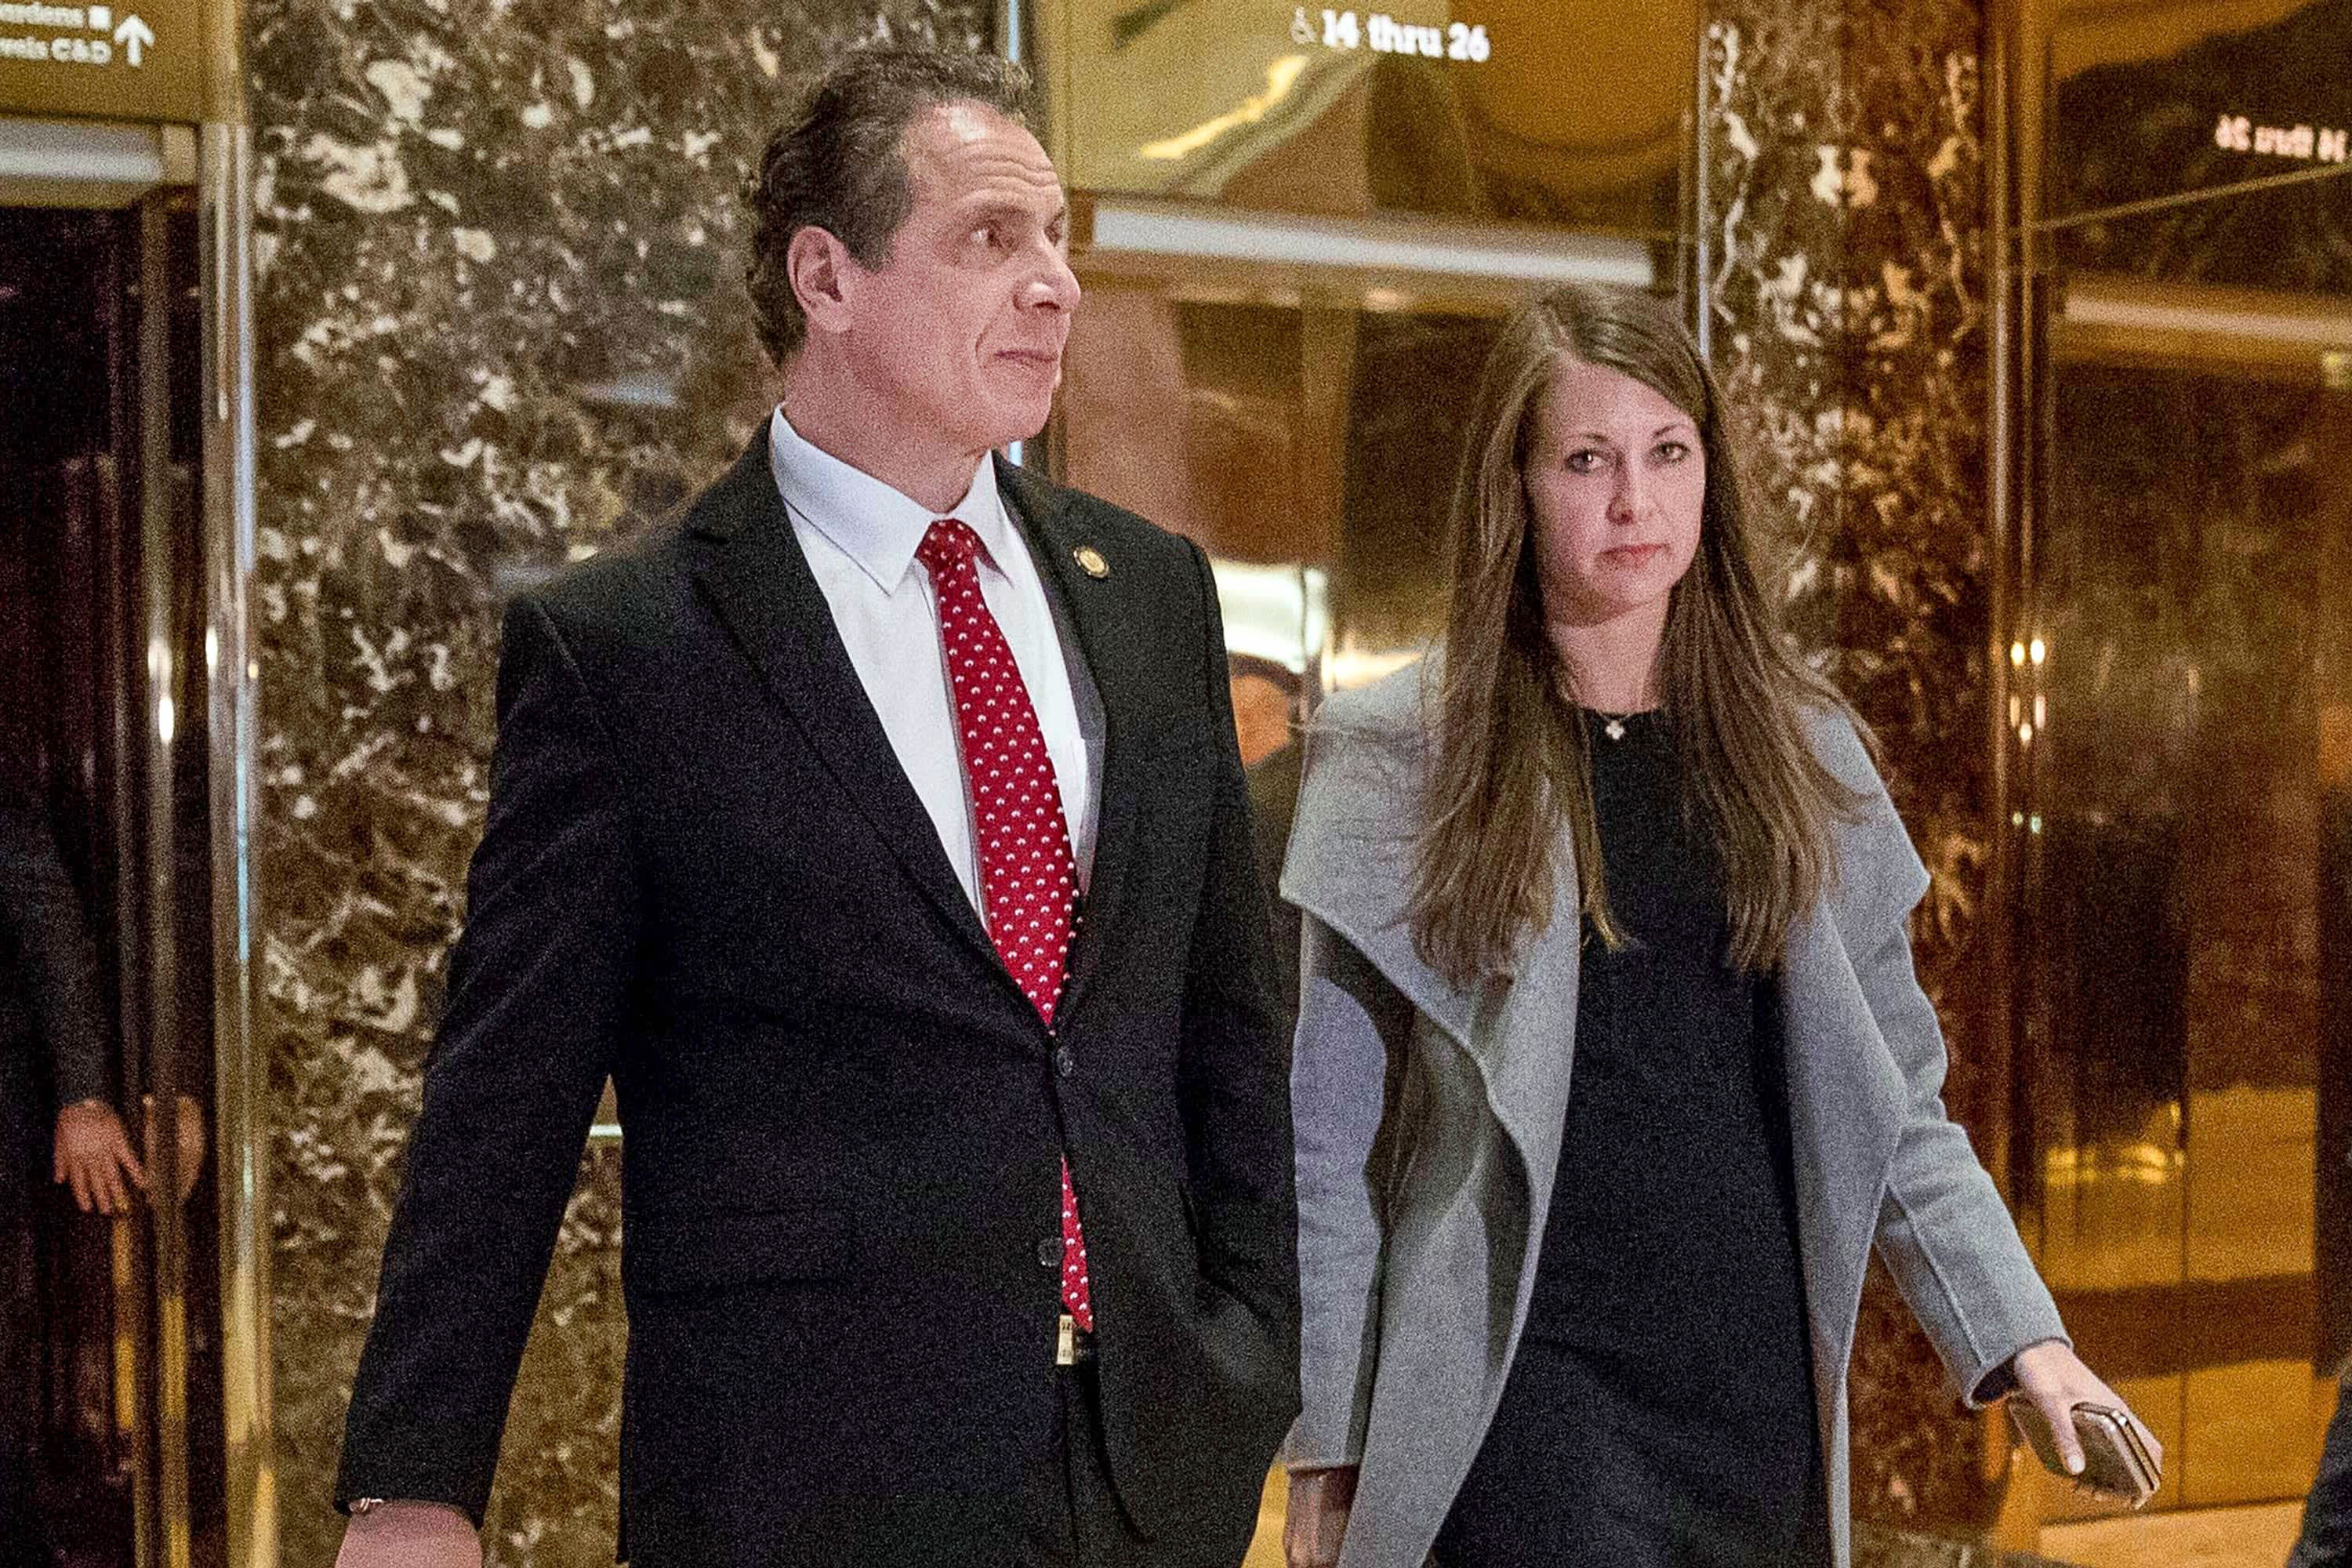 Cuomo advisors used campaign aide to dig up dirt on an accuser who was running for office, records show